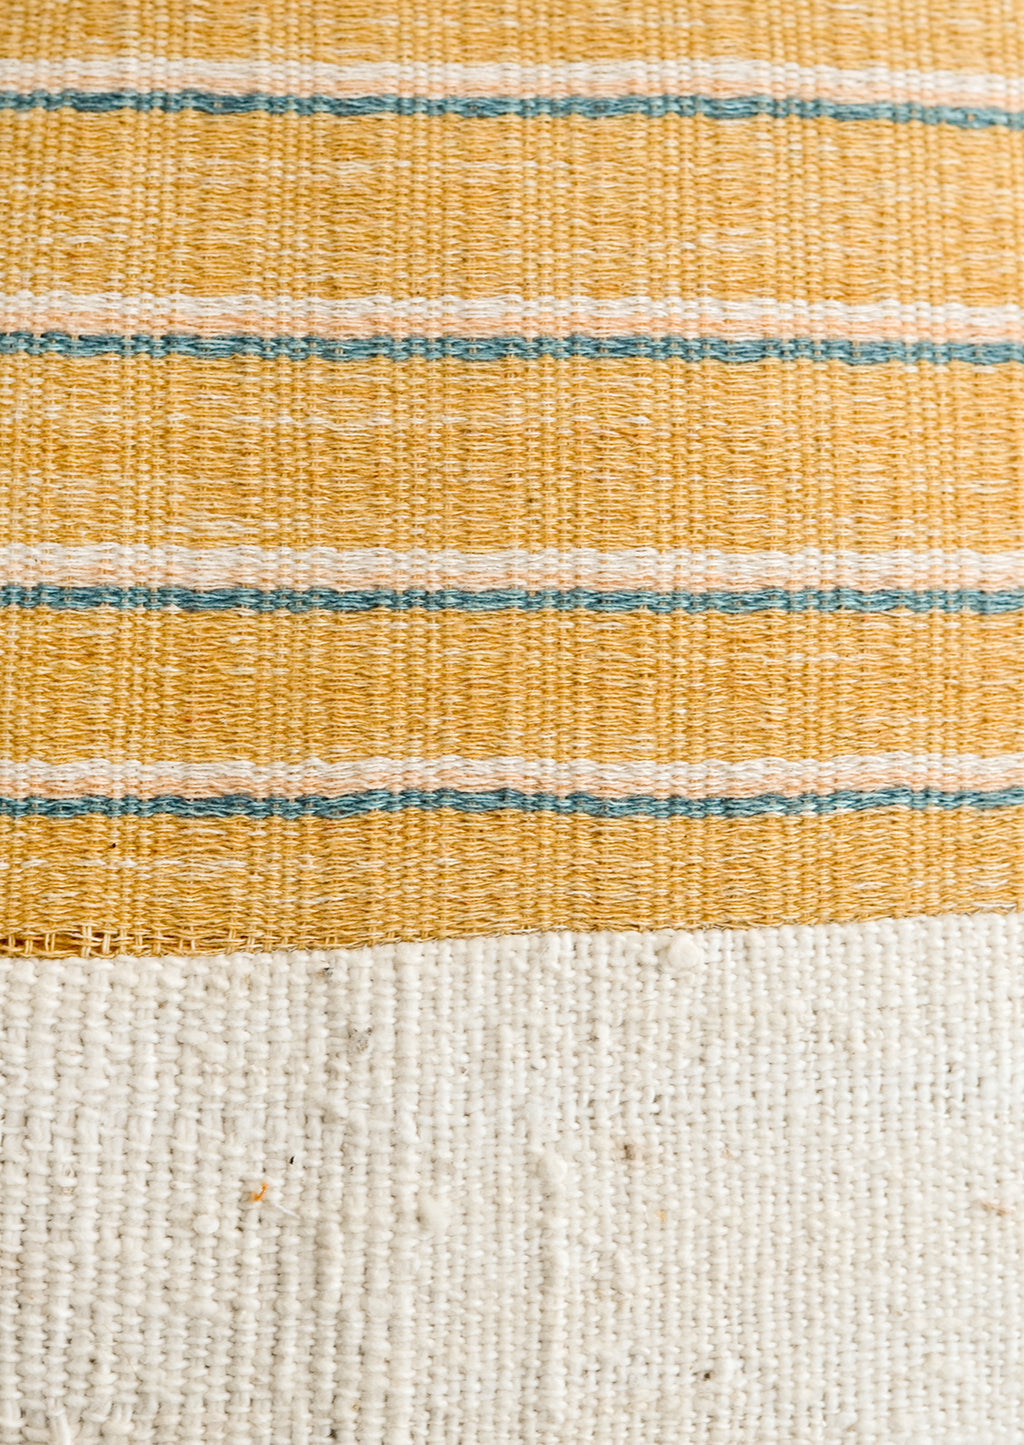 4: A mustard, ivory, peach and turquoise striped fabric combined with natural mudcloth fabric.